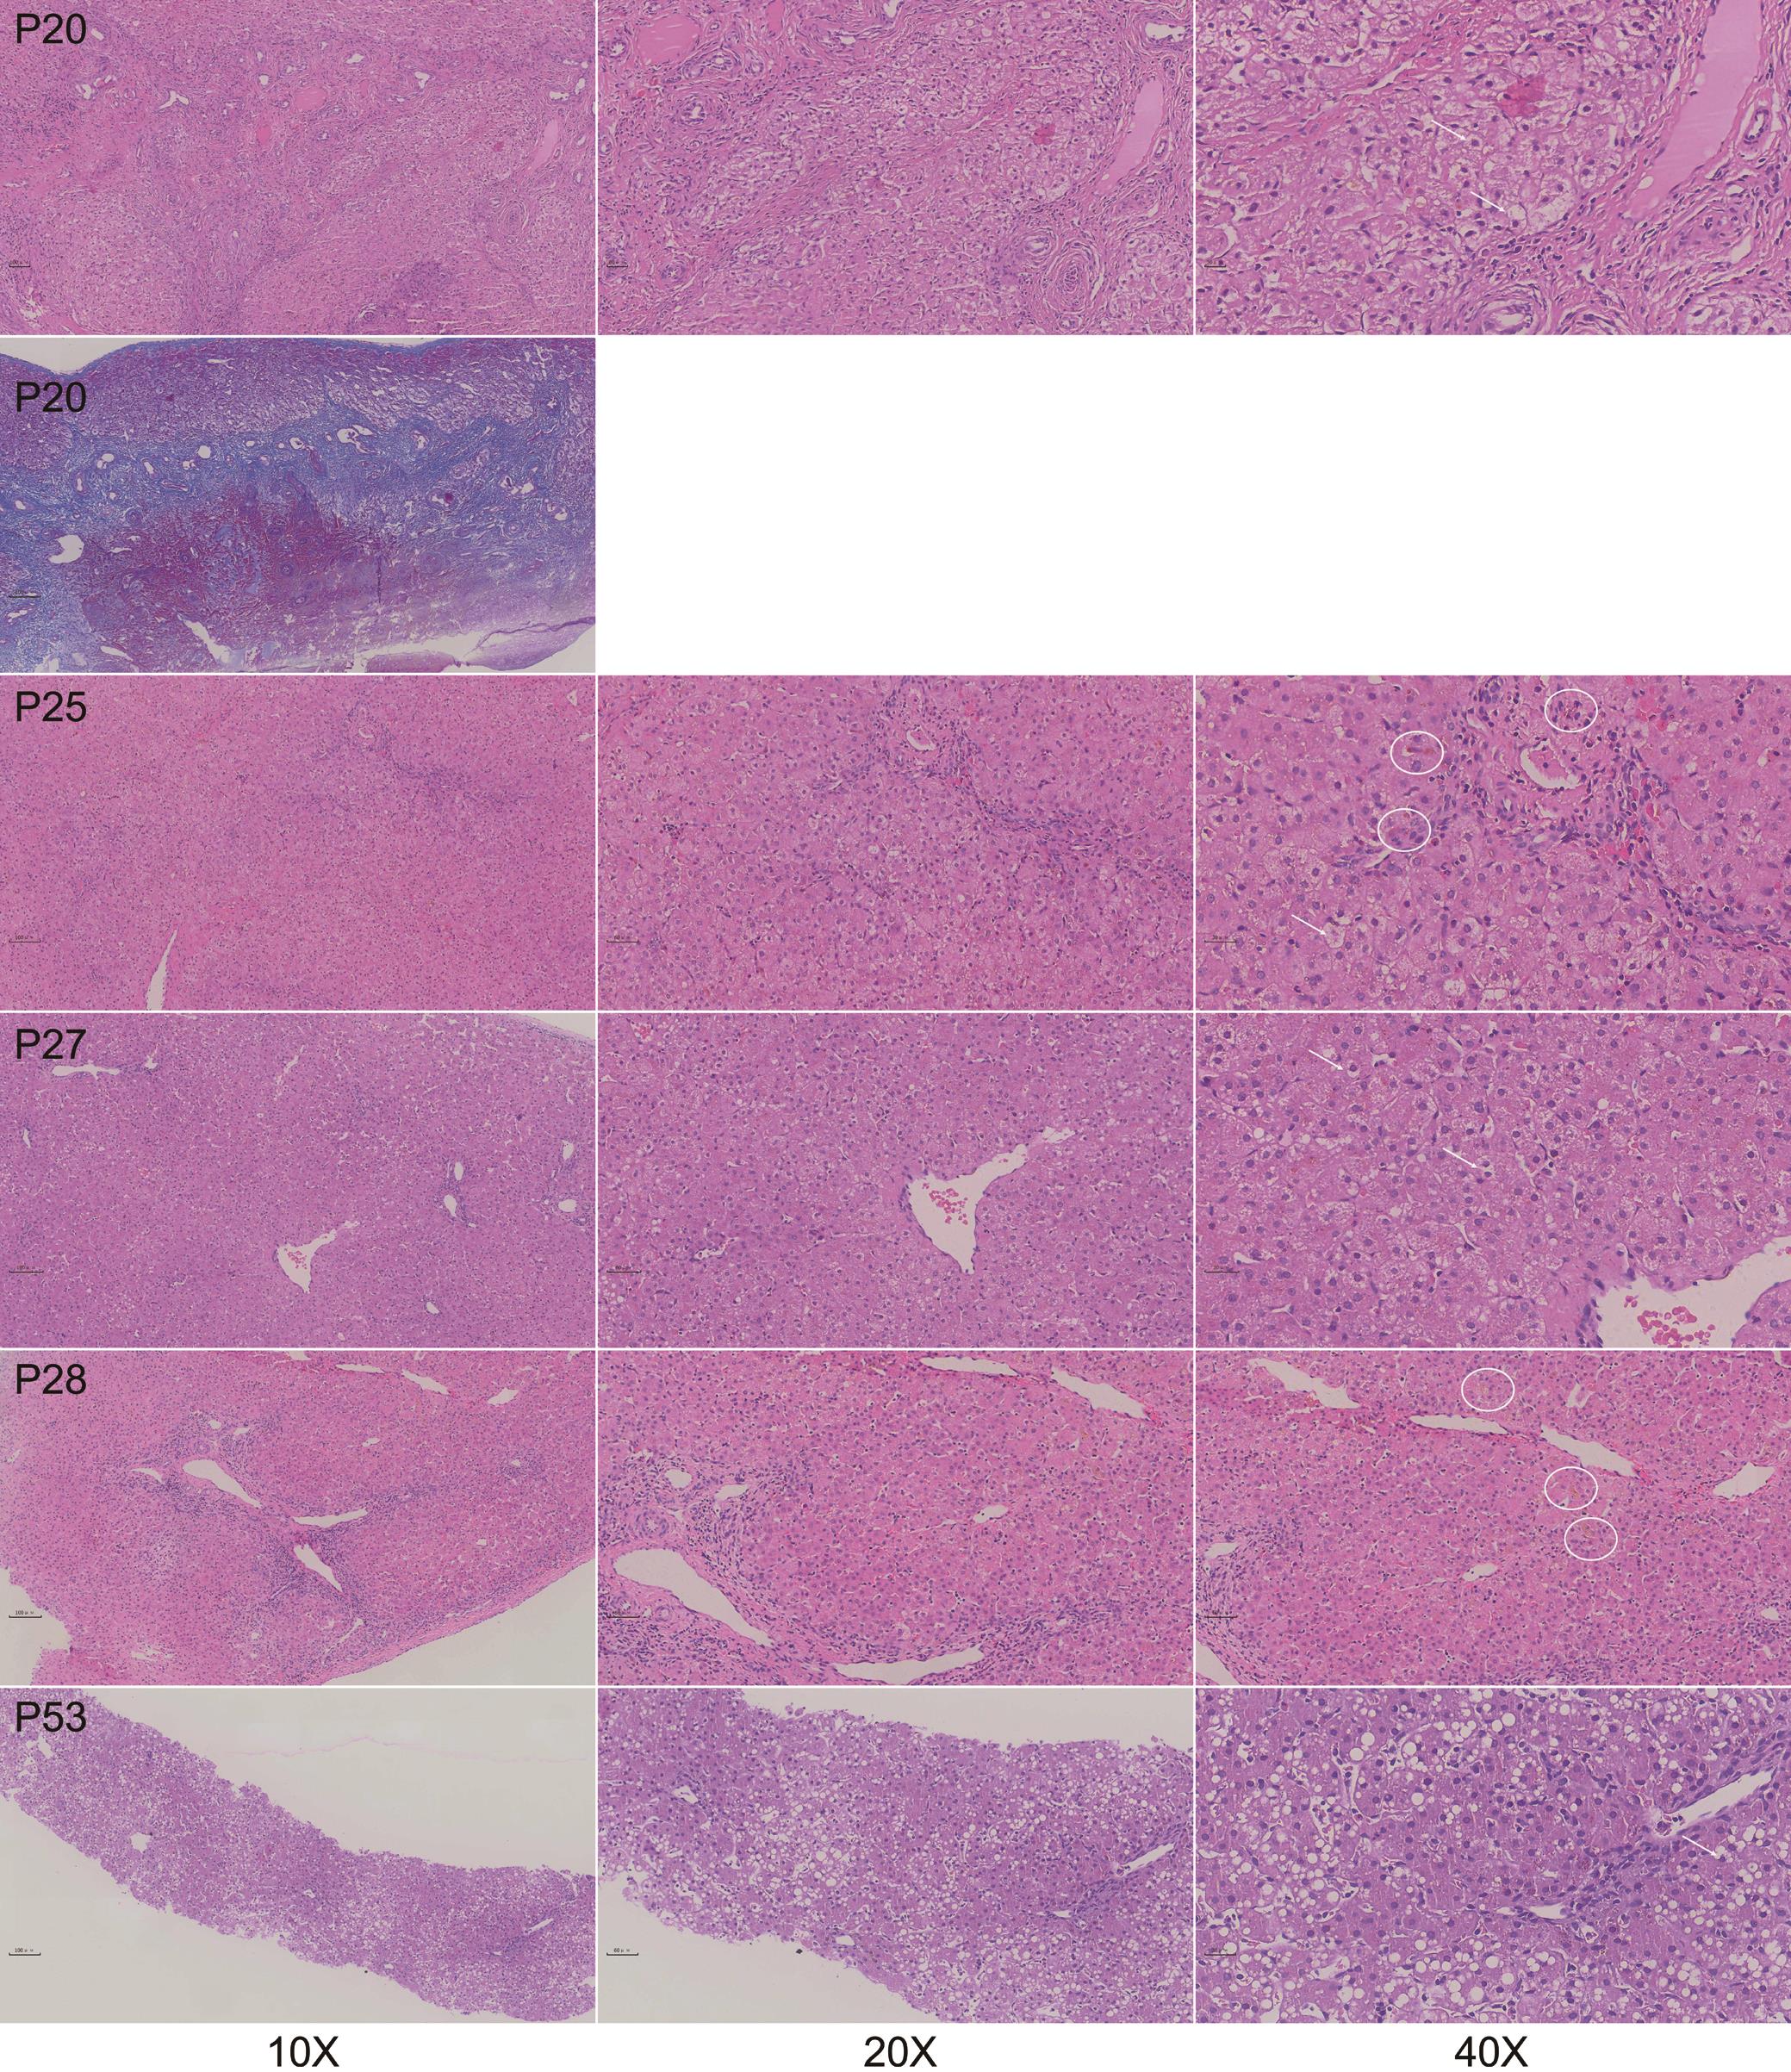 Histopathologic findings in the livers of five patients.